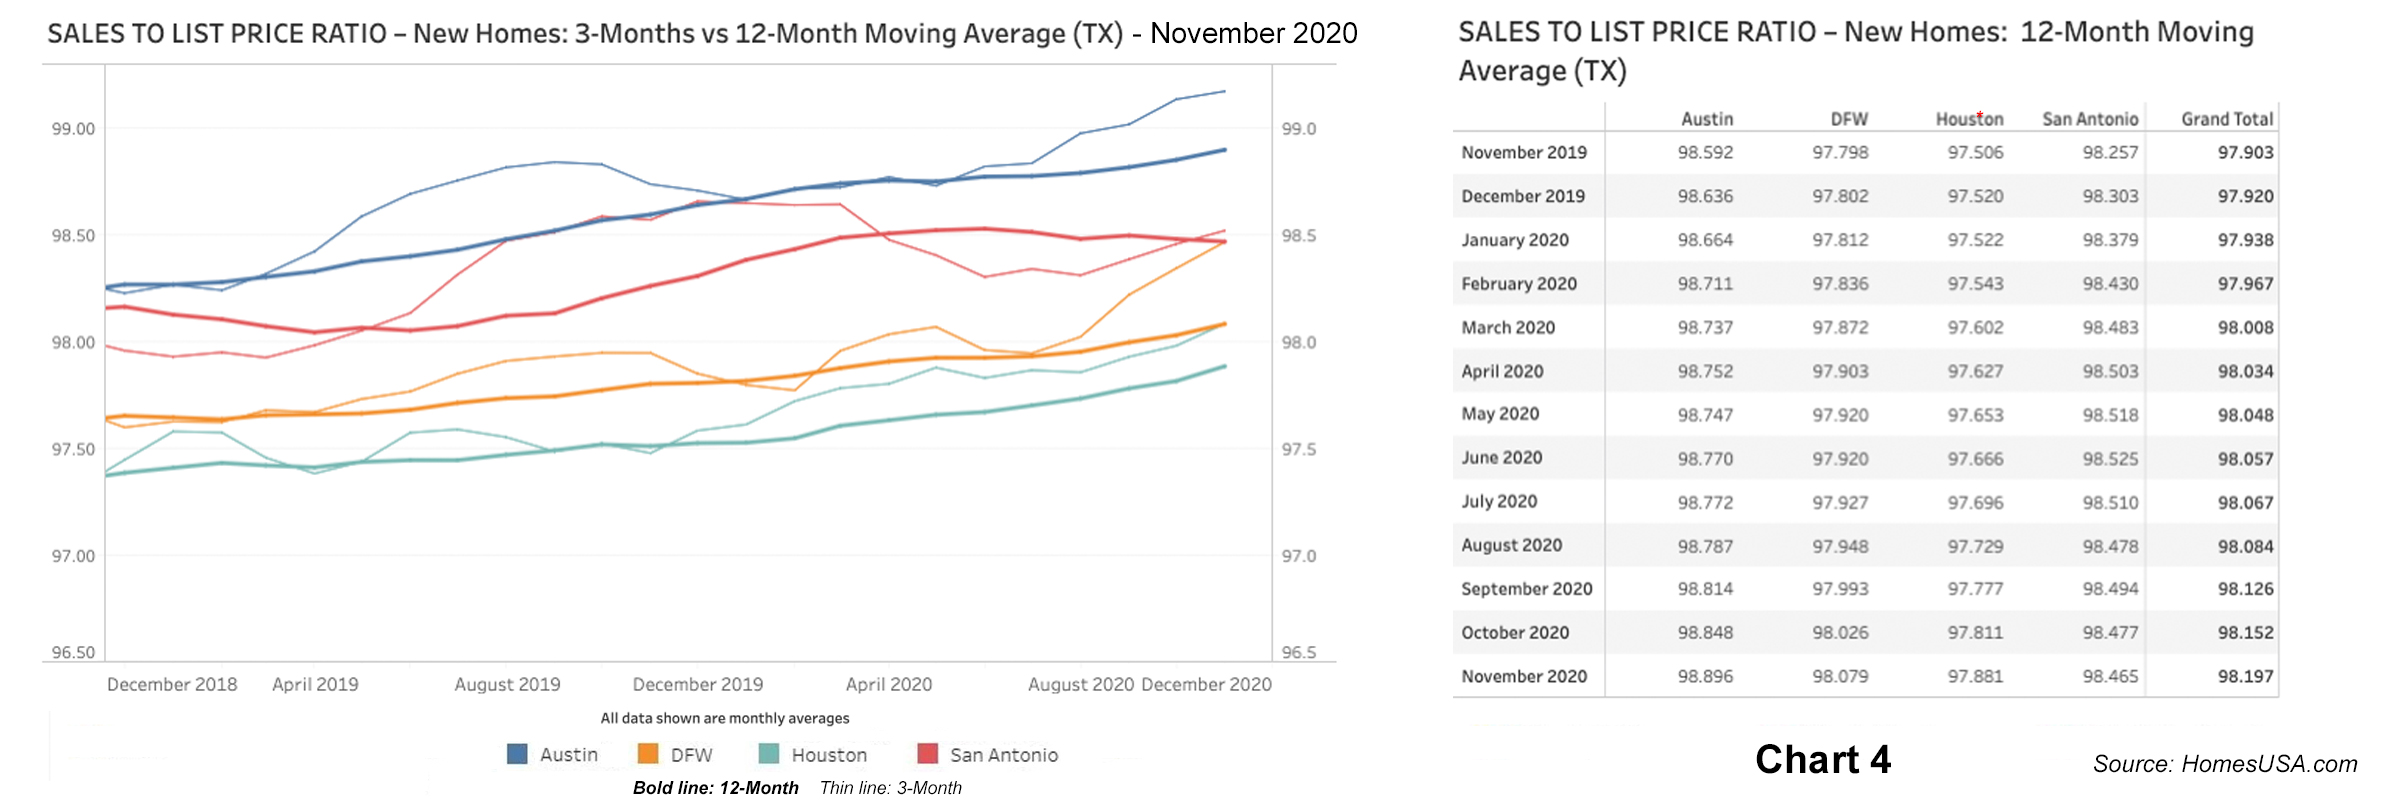 Chart 4: Sales-to-List-Price Ratio Data for Texas New Homes - November 2020